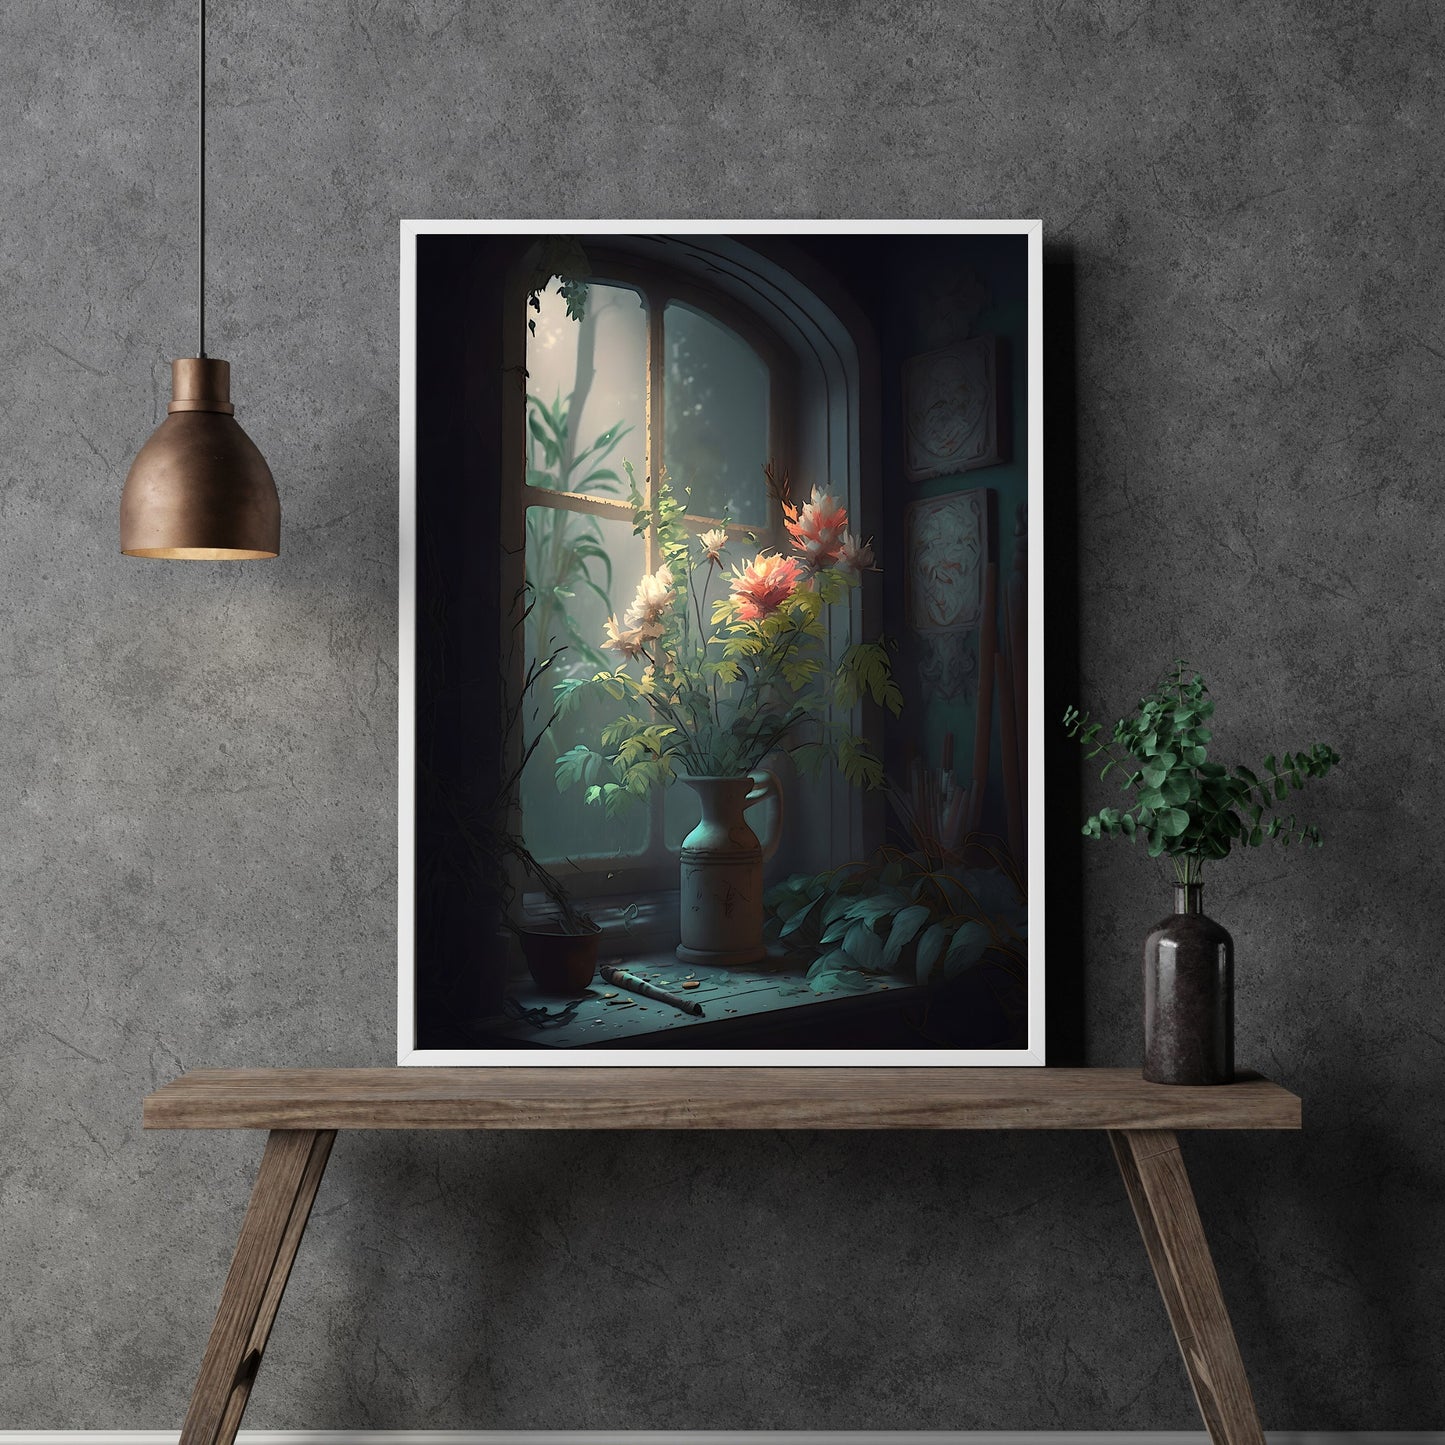 Vase with Flowers Wall Art Painting Moody Floral Decor Vintage Farmhouse Decor Serene and Elegant Home Decor Still Life Art Paper Poster Prints